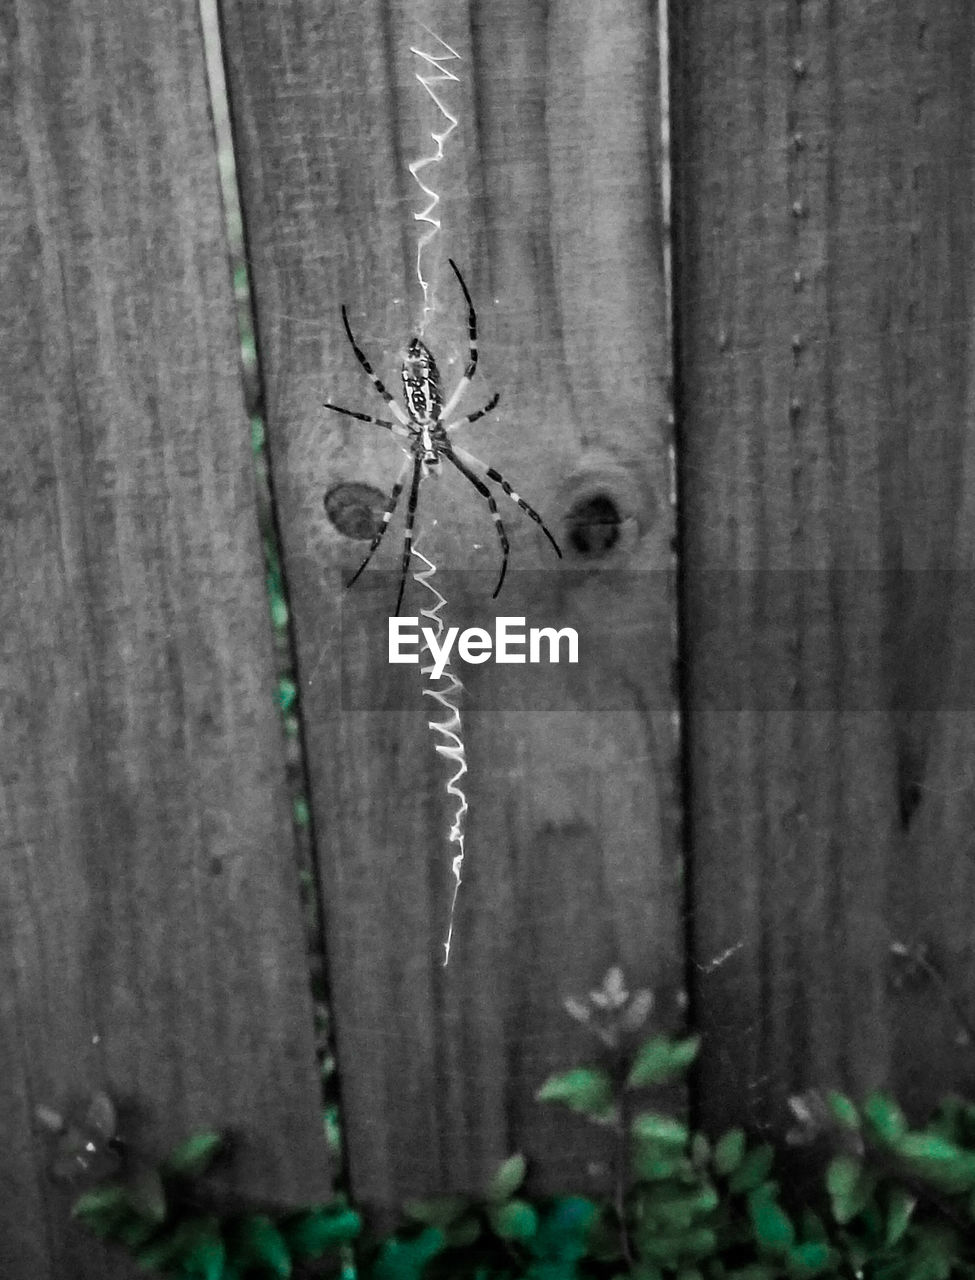 FULL FRAME SHOT OF PLANTS GROWING ON WOODEN FENCE